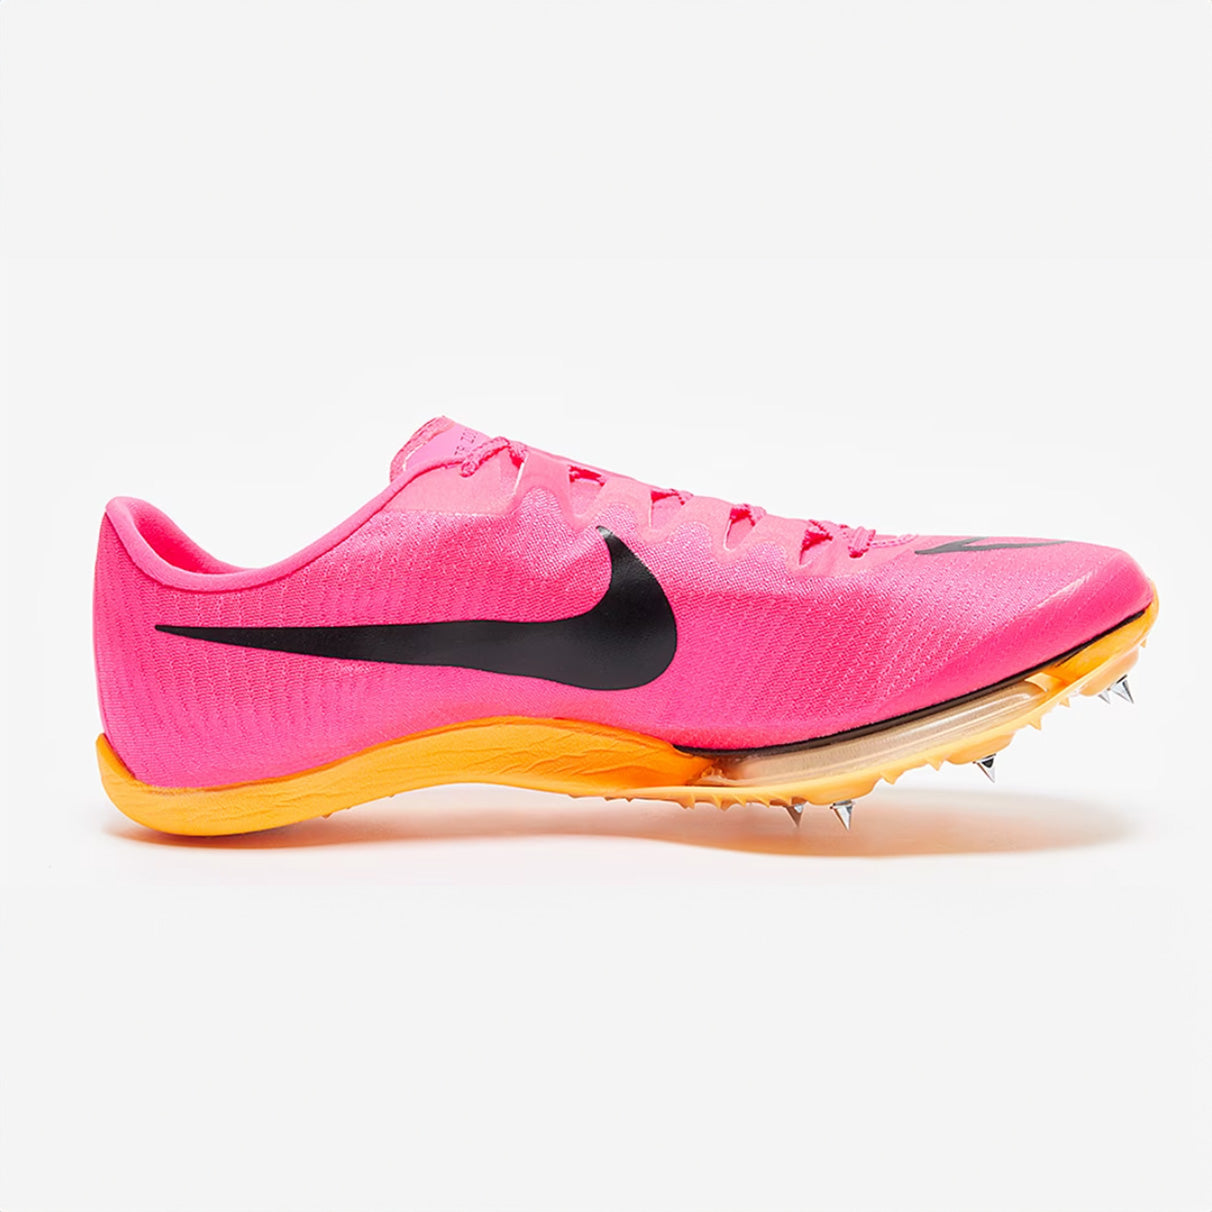 Nike Air Zoom Maxfly Sprint Spikes Pink